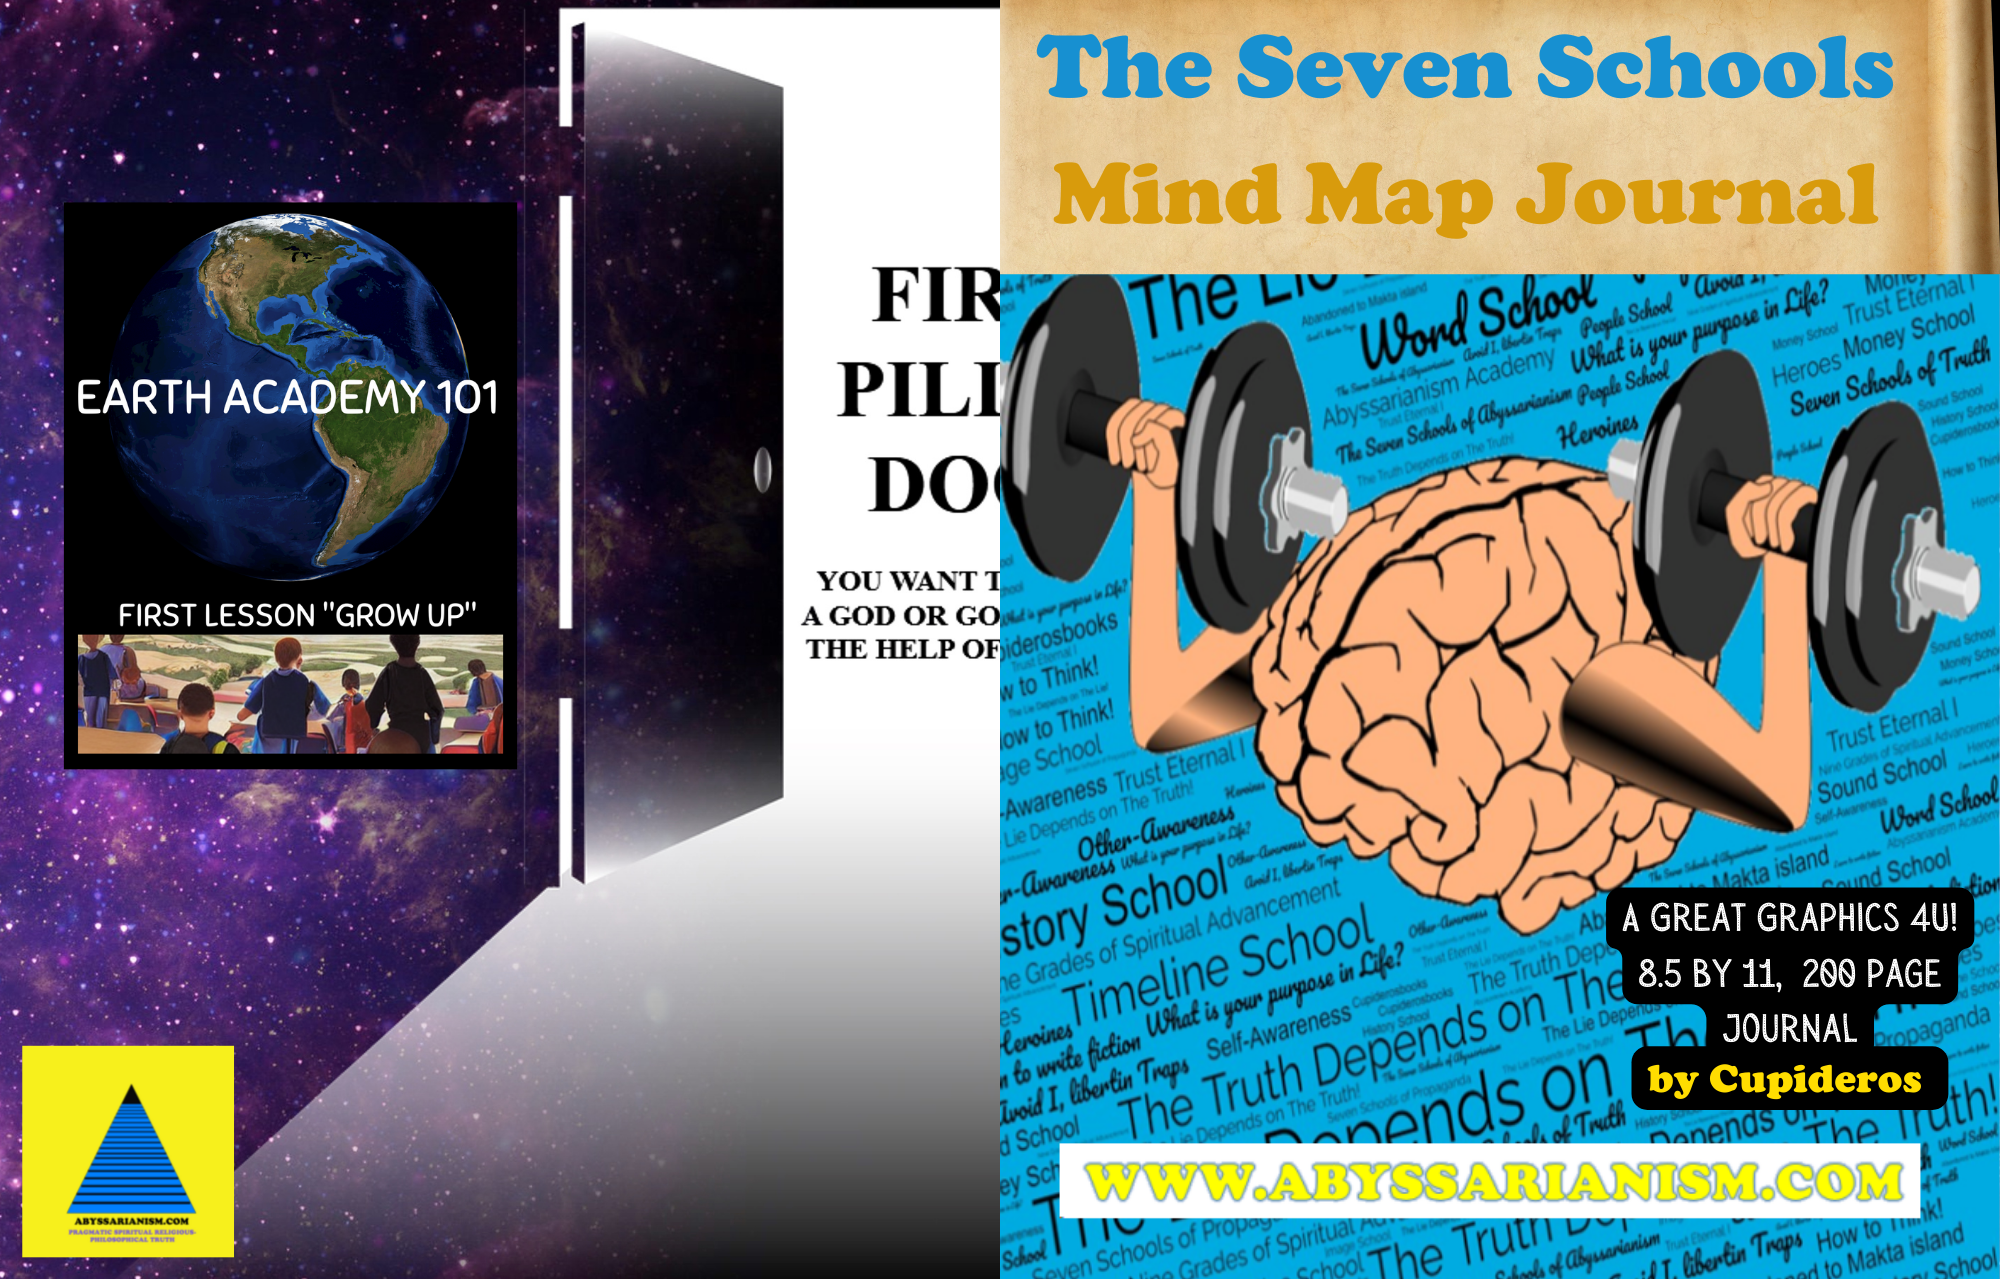 The Seven Schools Mind Map Journal!